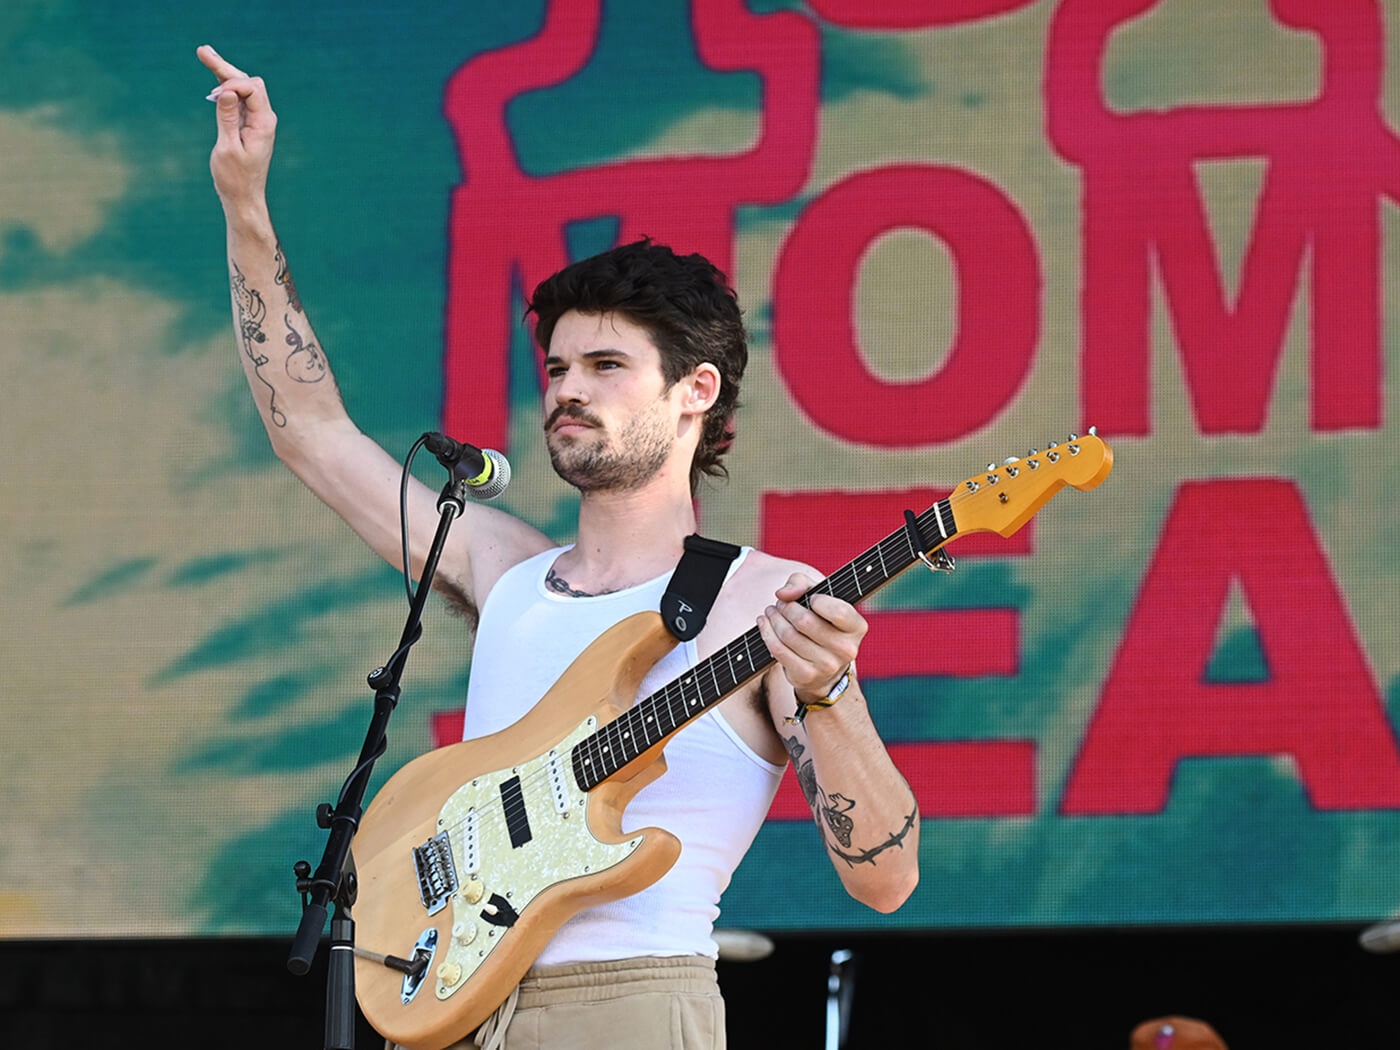 Eric Butler of Mom Jeans performing at Riot Fest 2022, photo by Daniel Boczarski/Getty Images